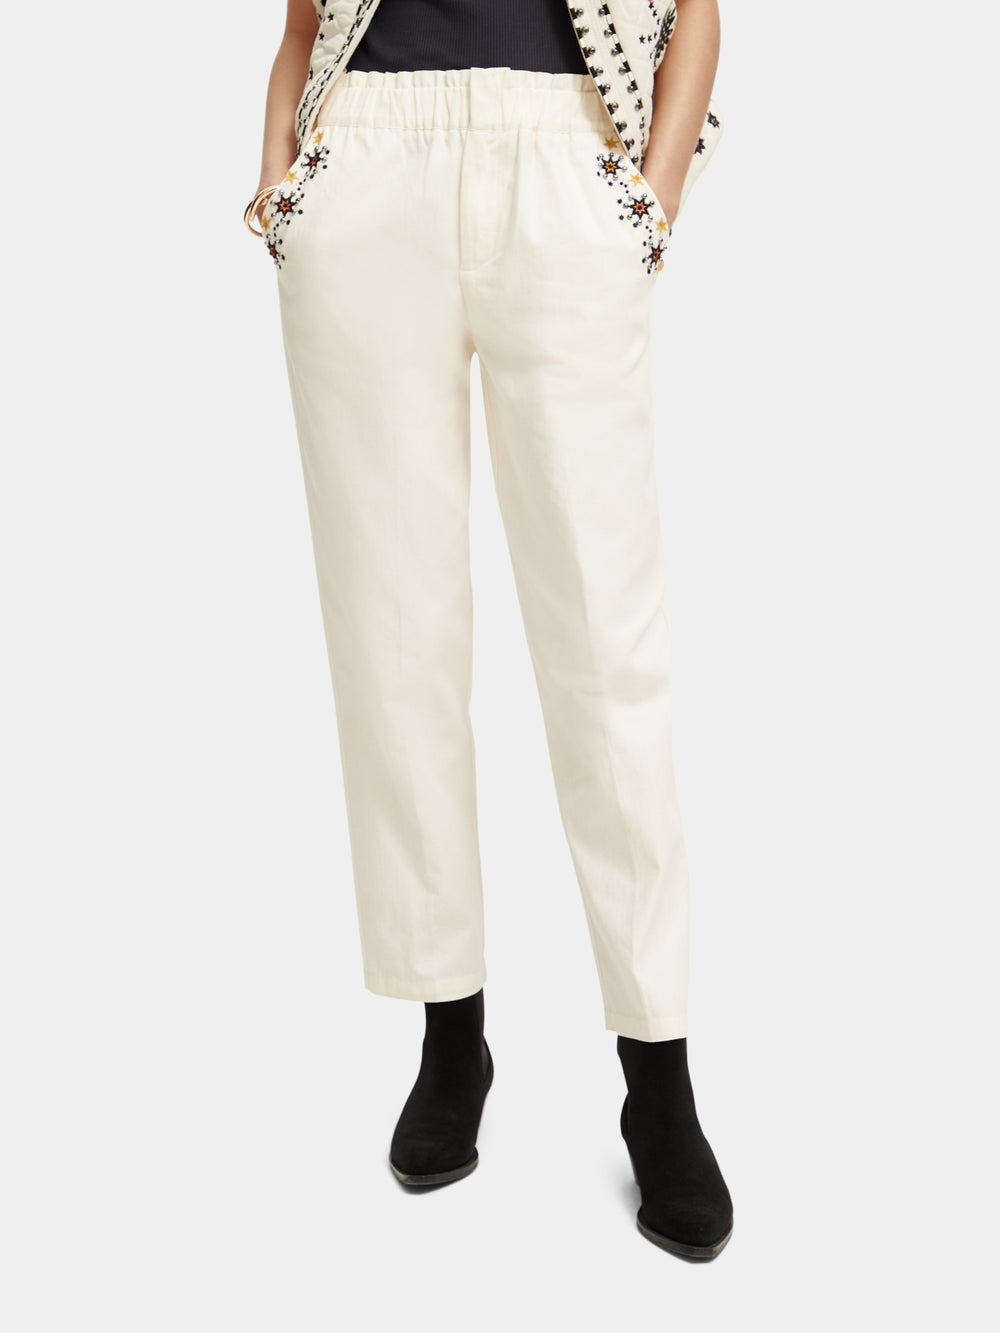 Embroidered high-rise pants - Scotch & Soda NZ